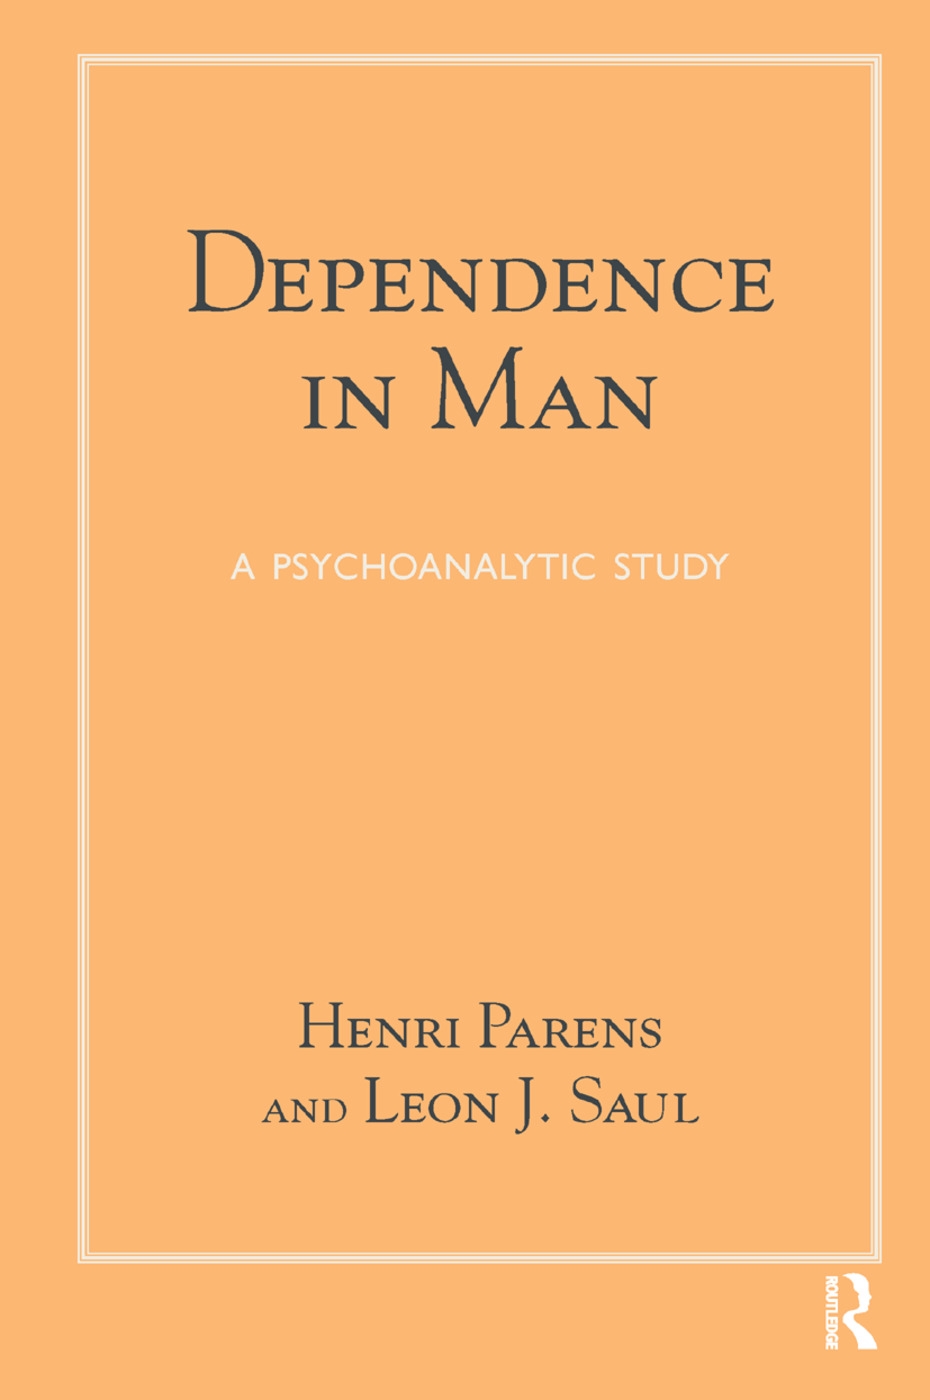 Dependence in Man: A Psychoanalytic Study